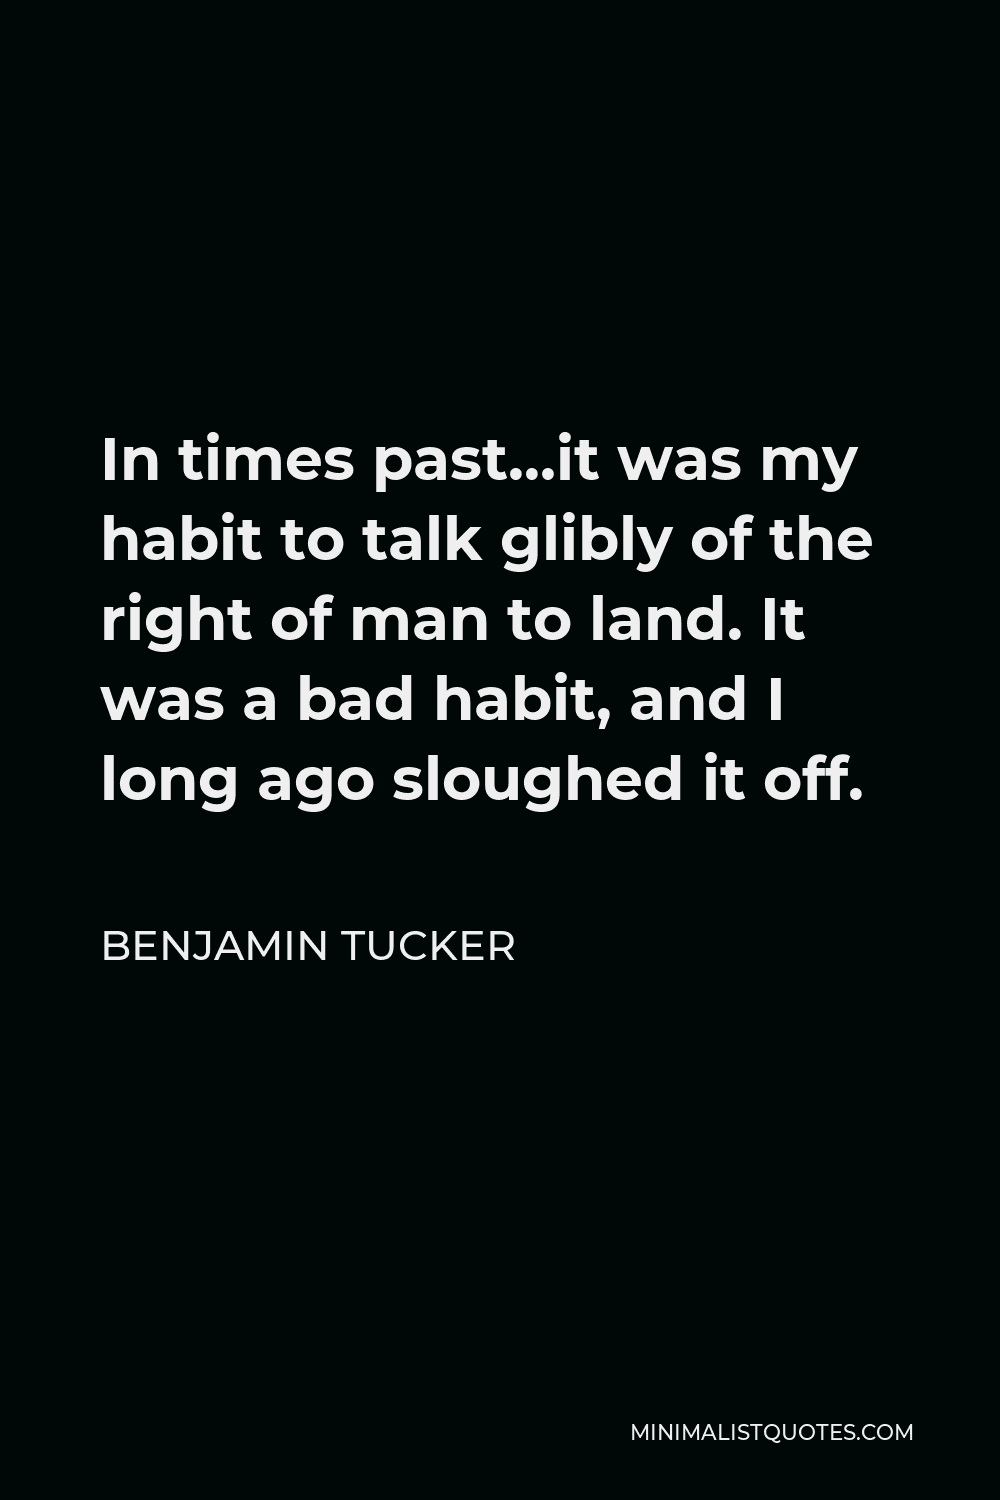 Benjamin Tucker Quote - In times past…it was my habit to talk glibly of the right of man to land. It was a bad habit, and I long ago sloughed it off.